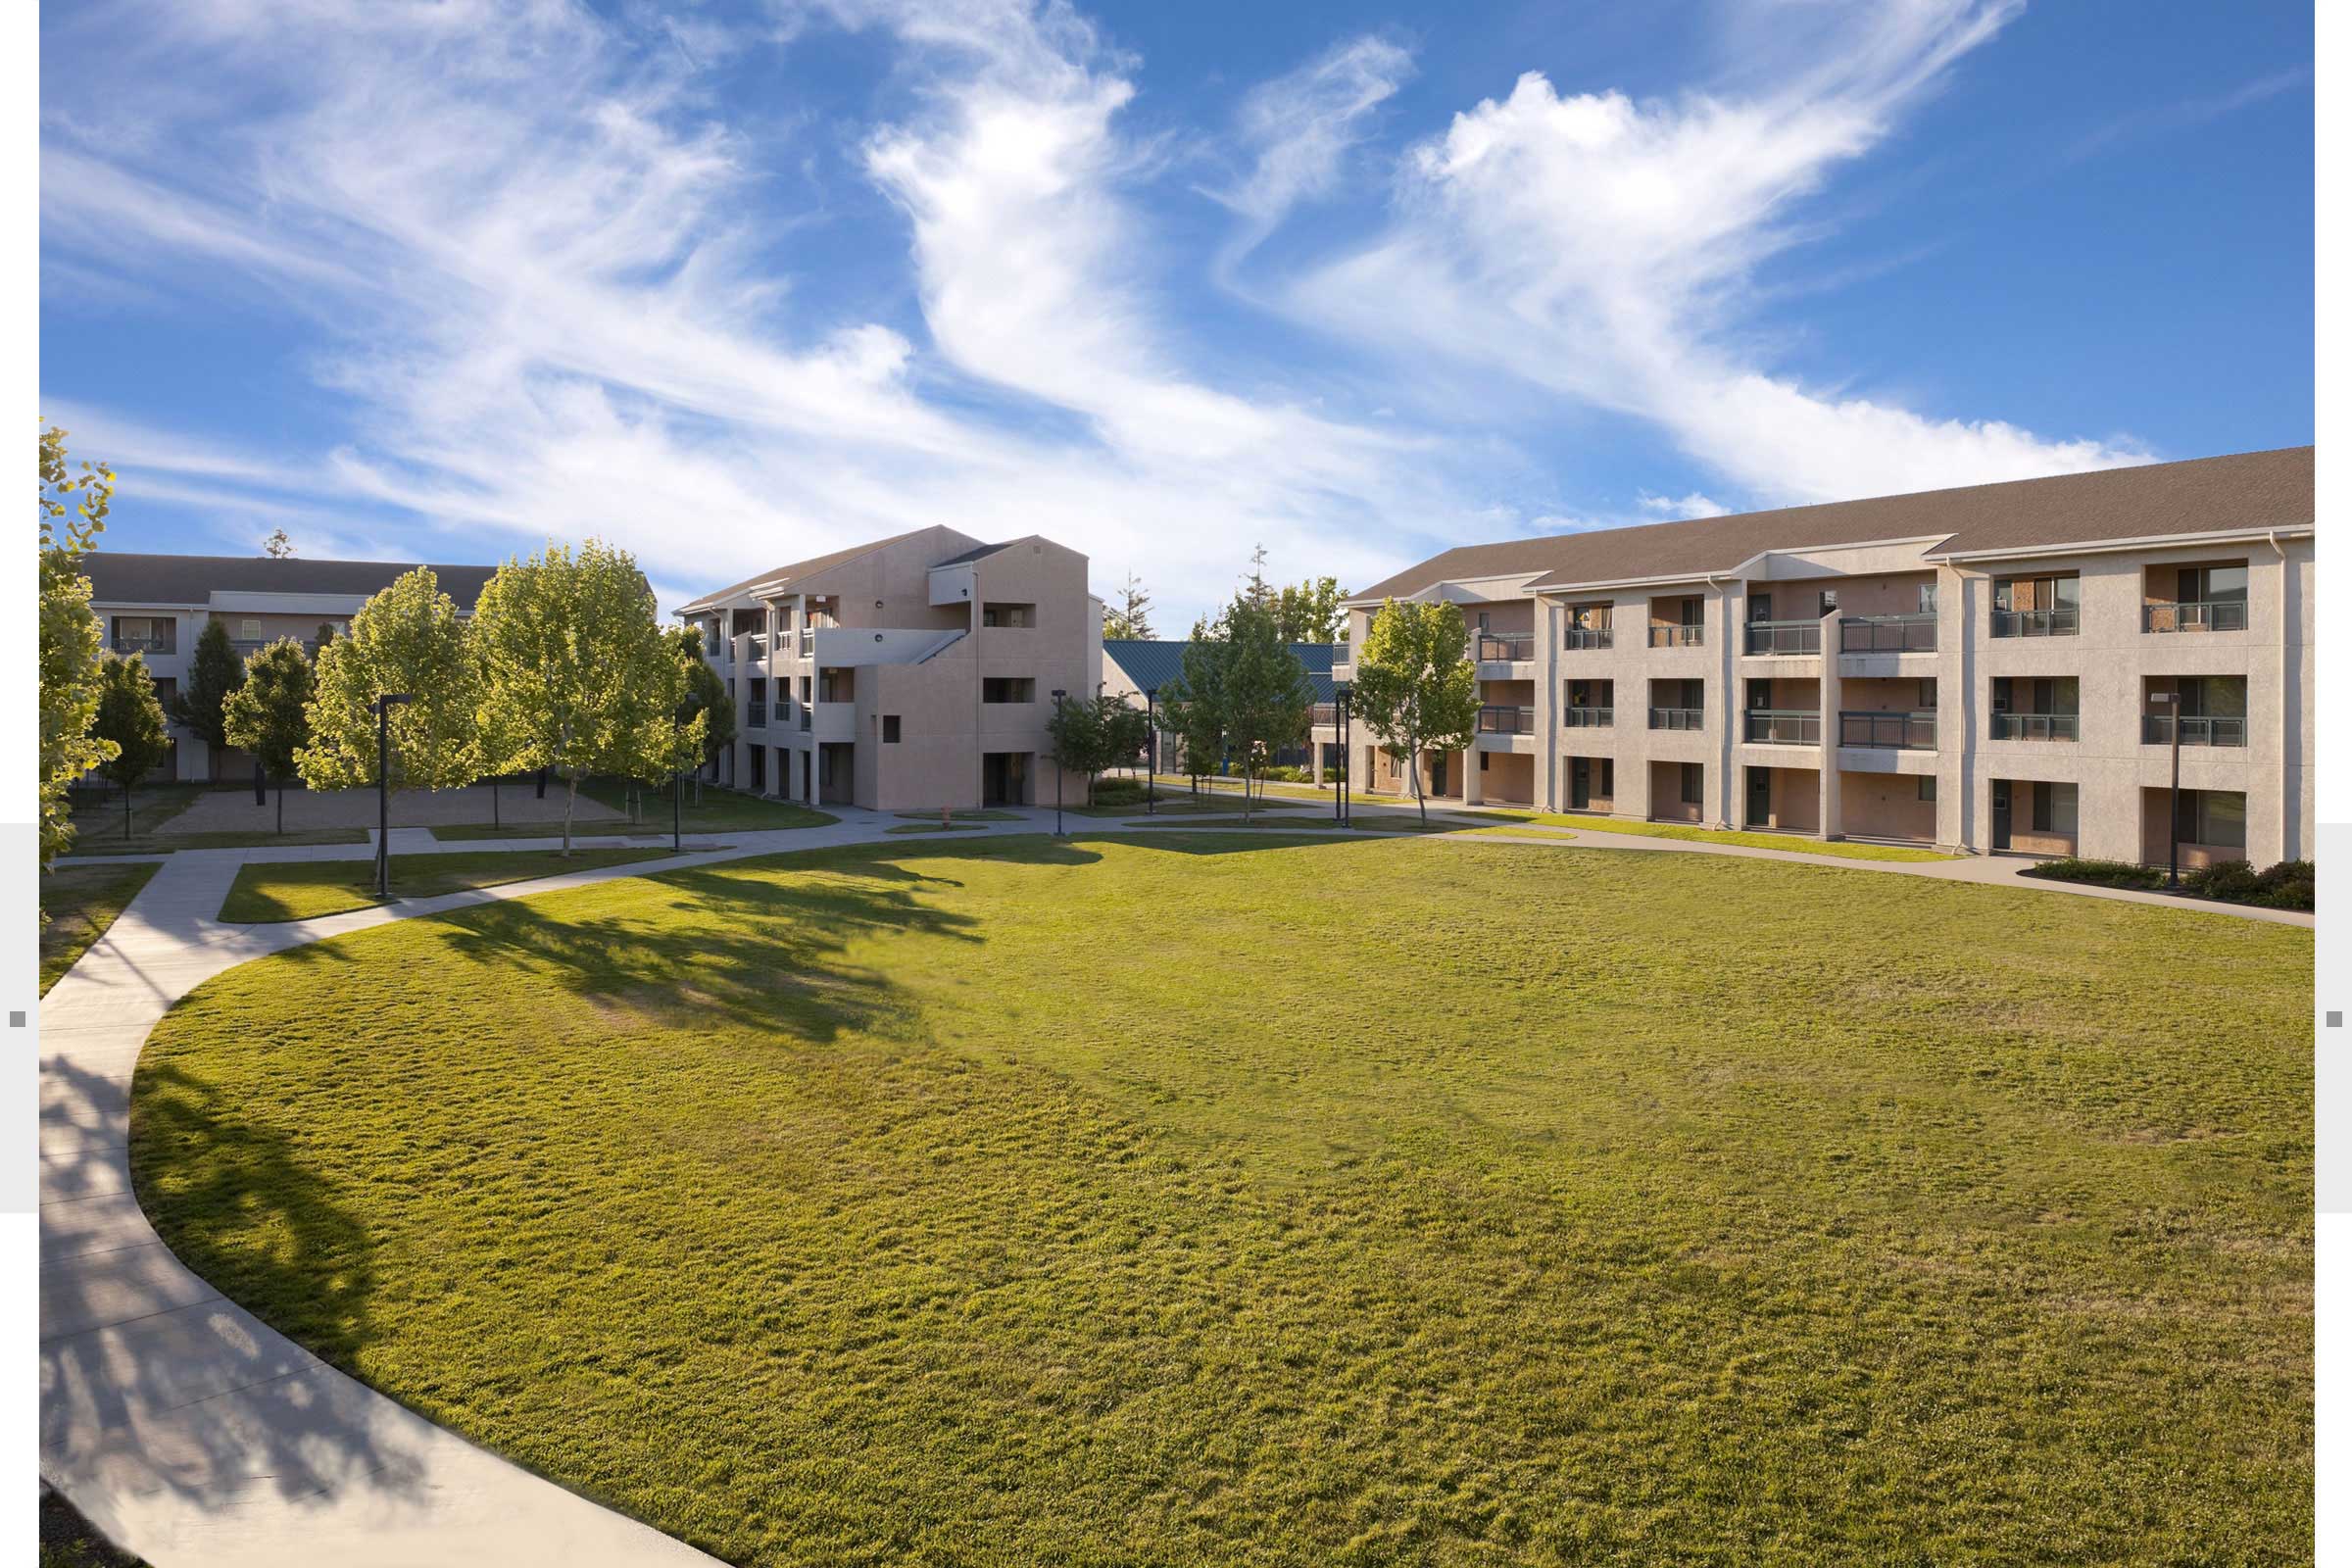 CSU exterior with large lawn area